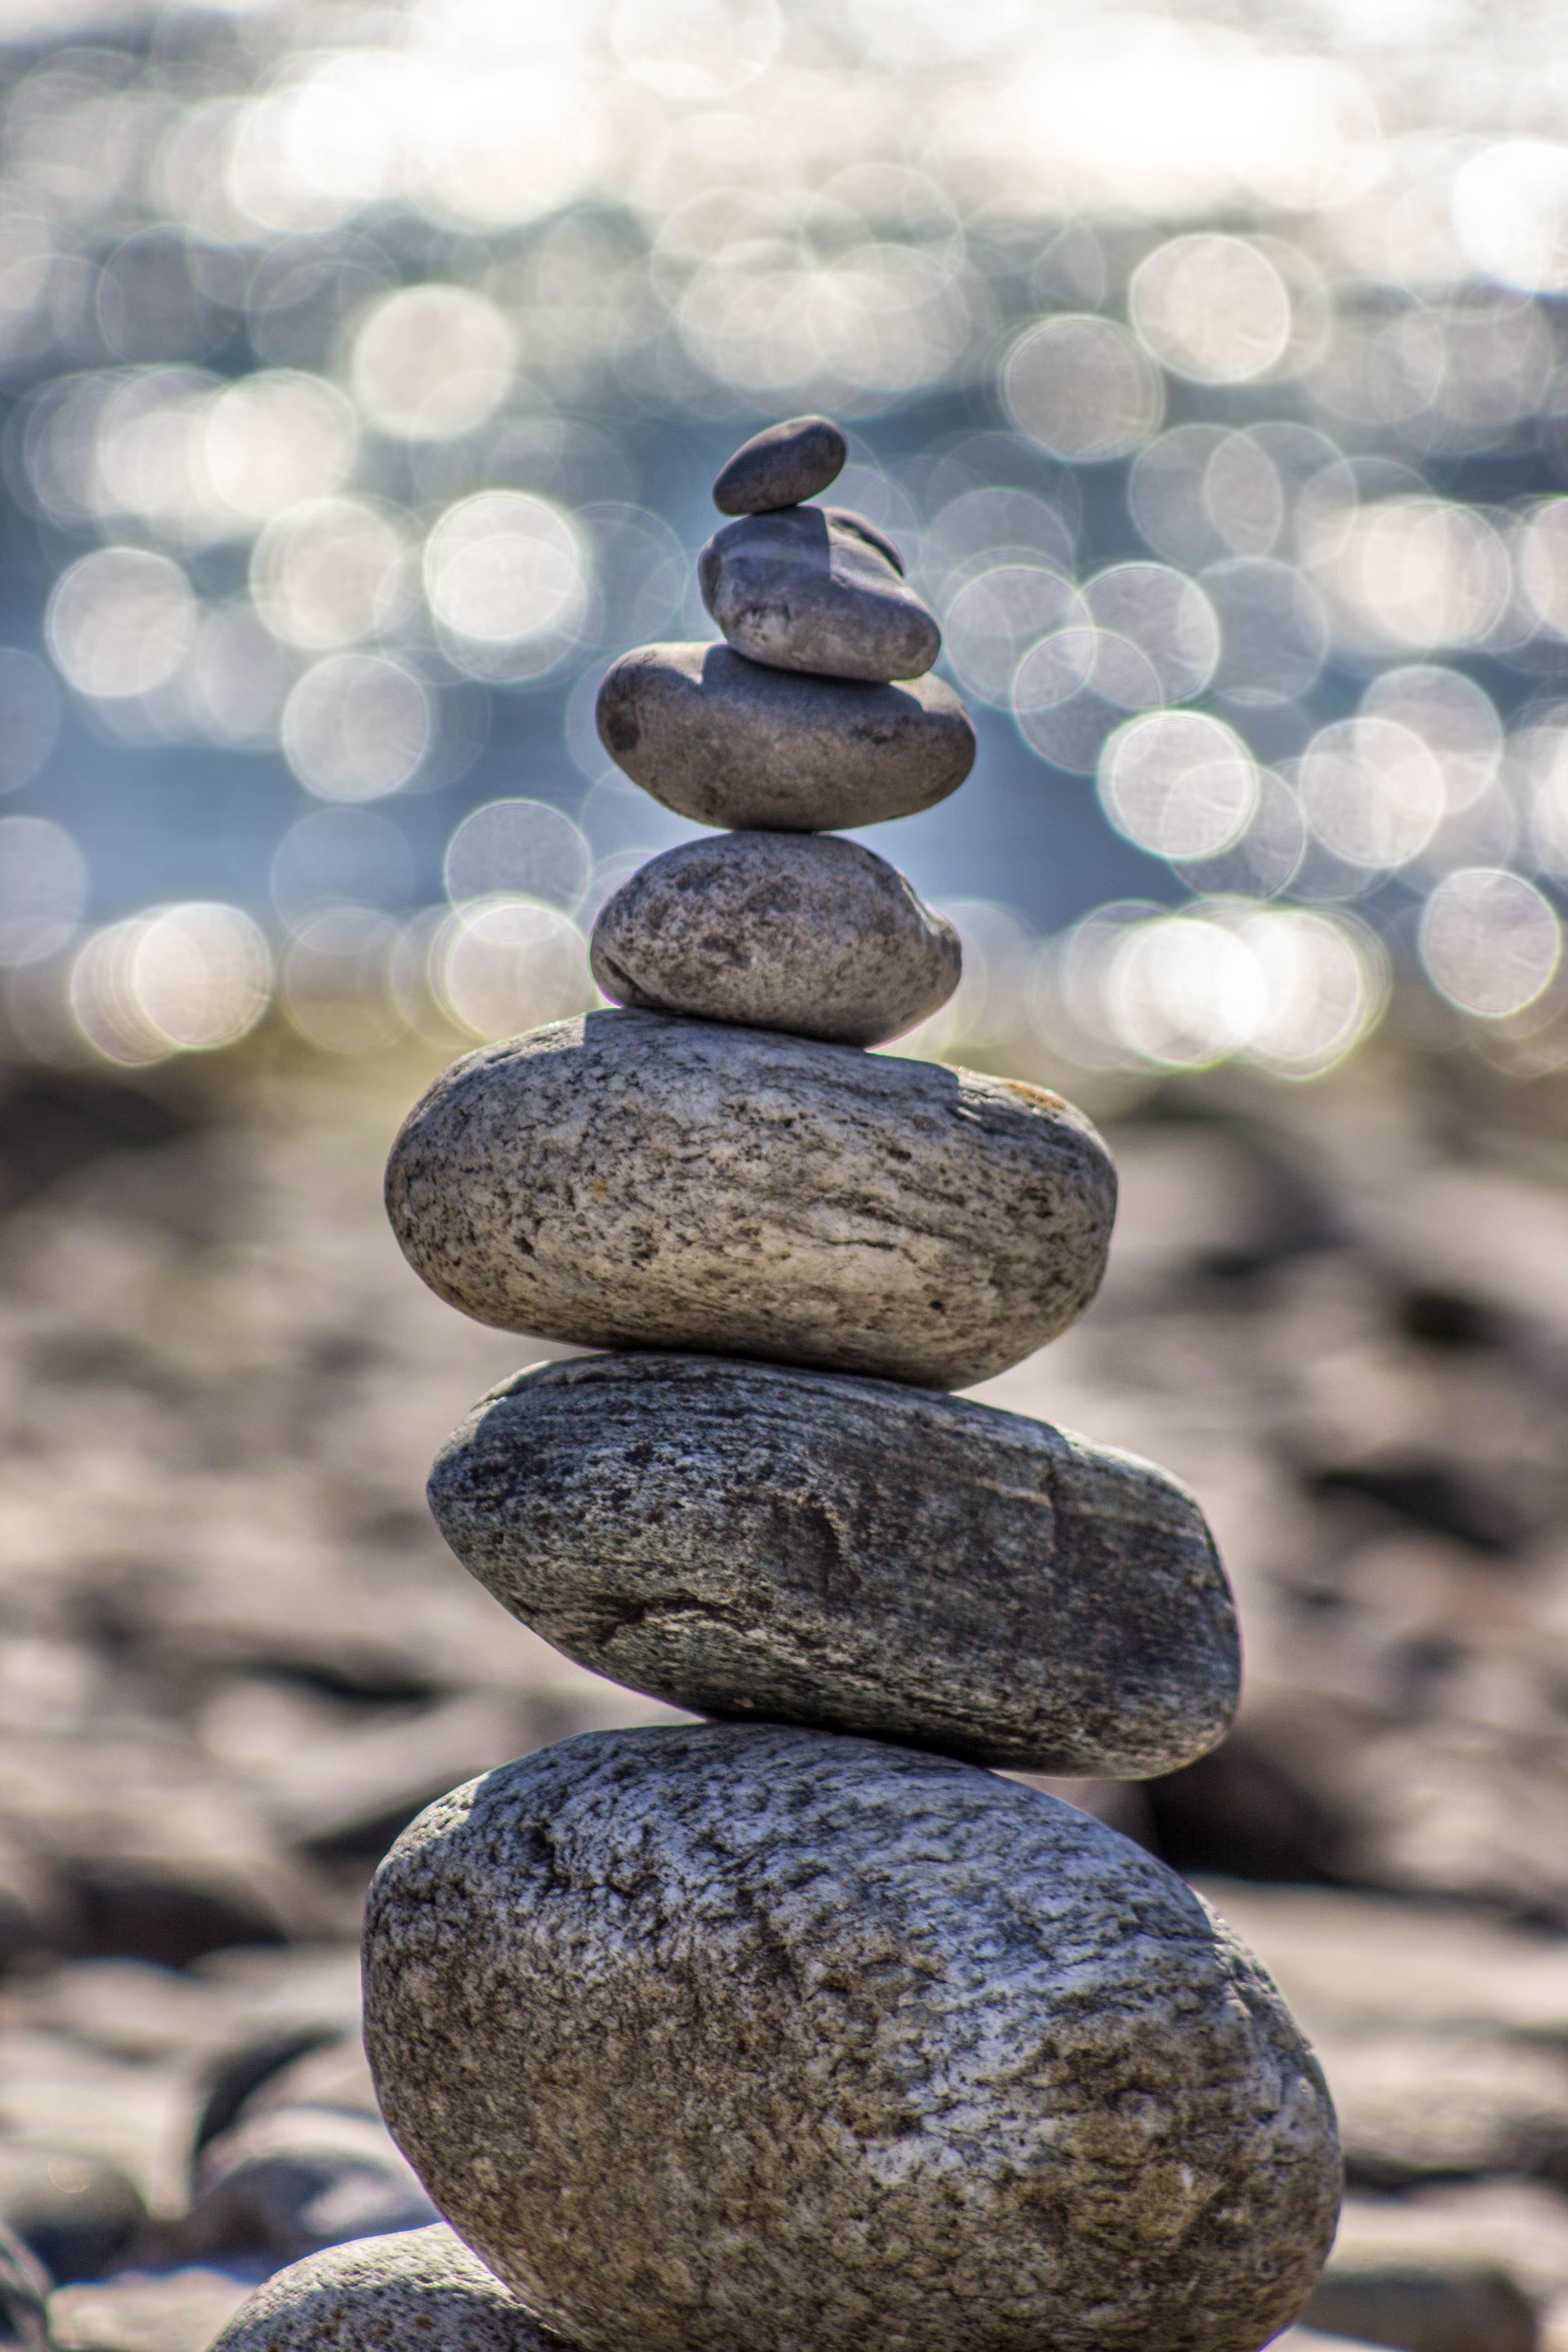 Rocks stacked on top of each other in an unsteady tower